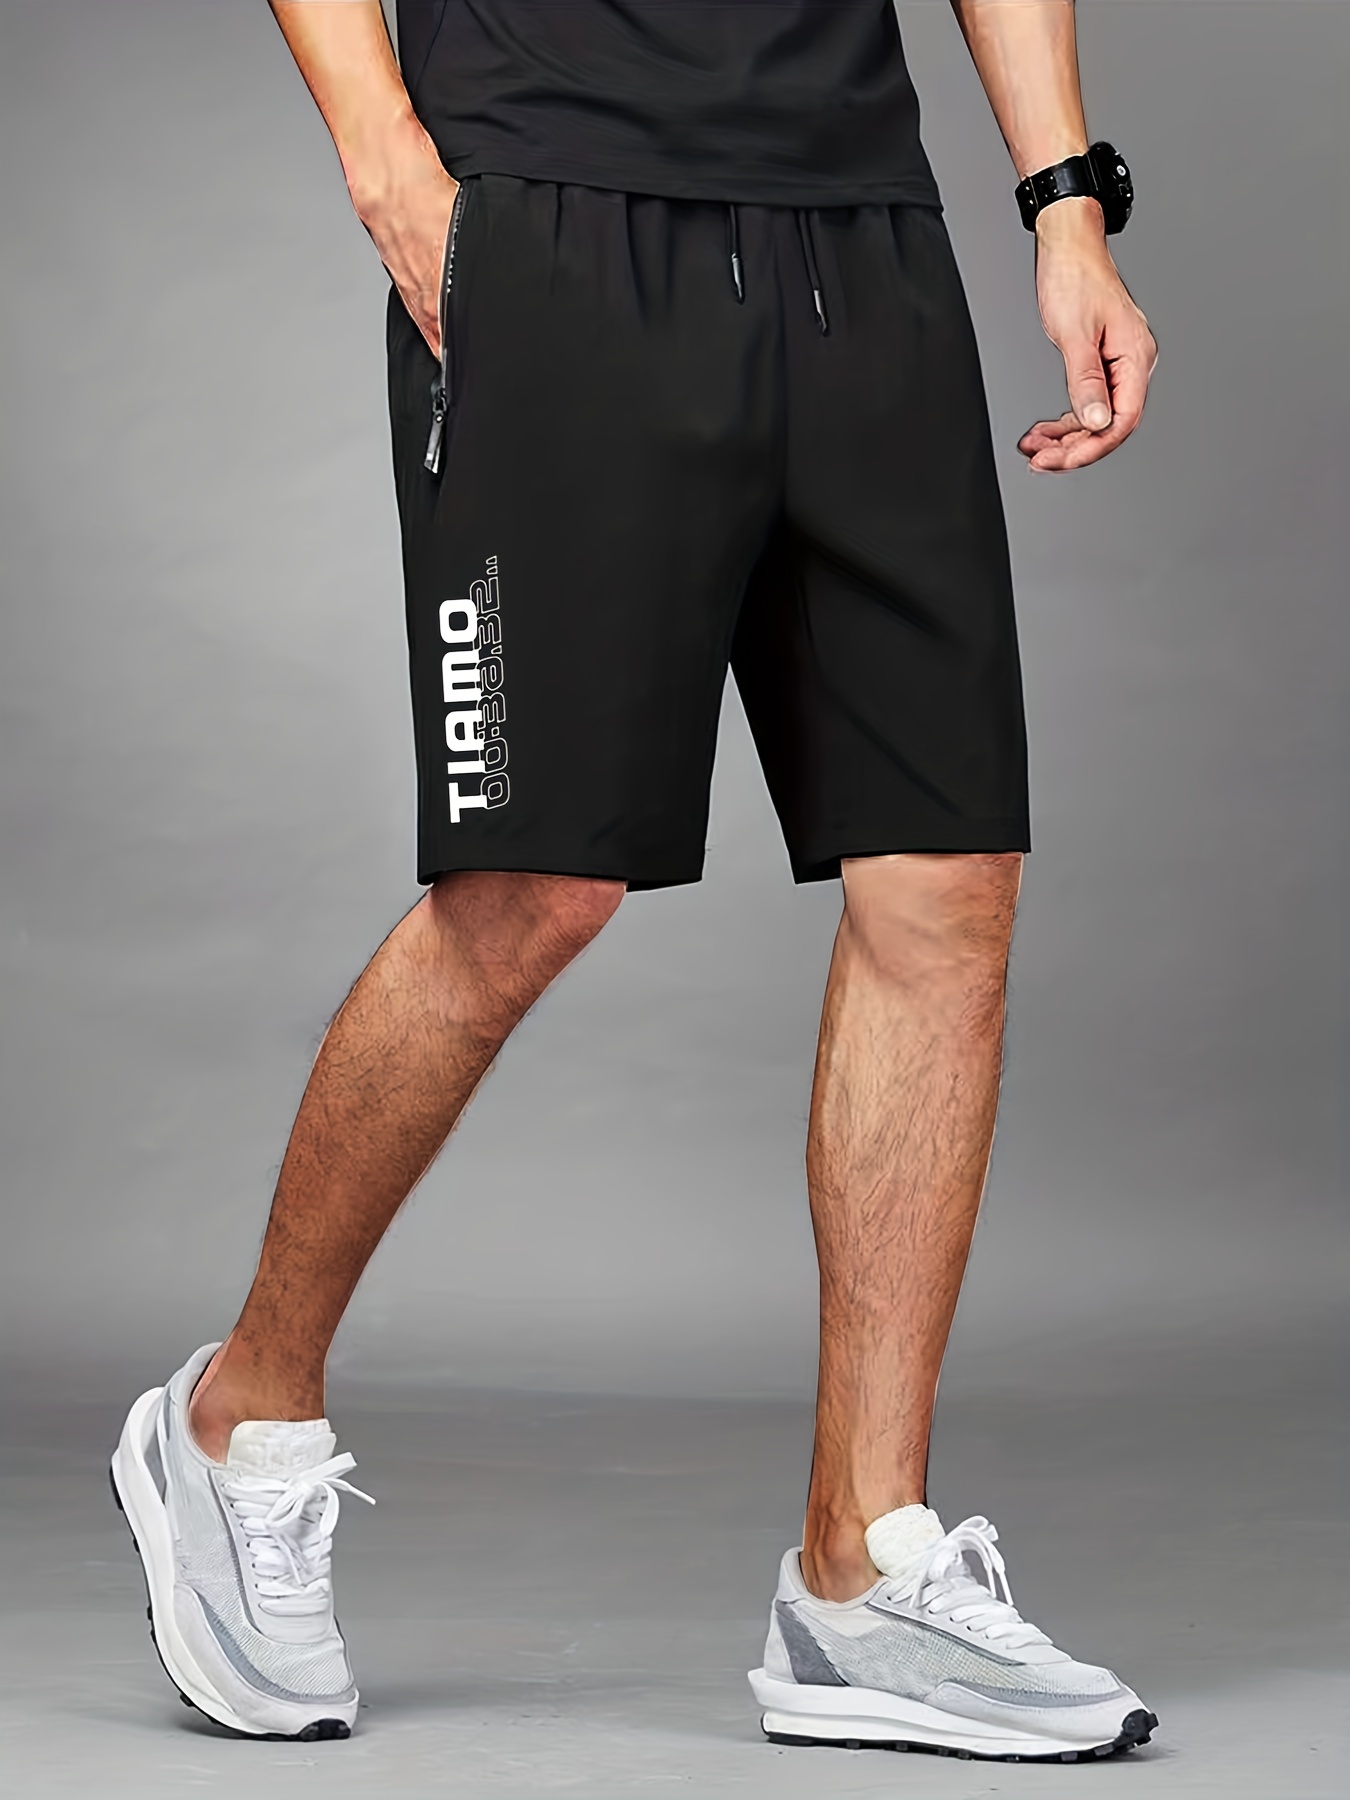 Men's Quick Dry Drawstring Sports Shorts - Perfect for Summer Training,  Fitness & Beach Basketball!